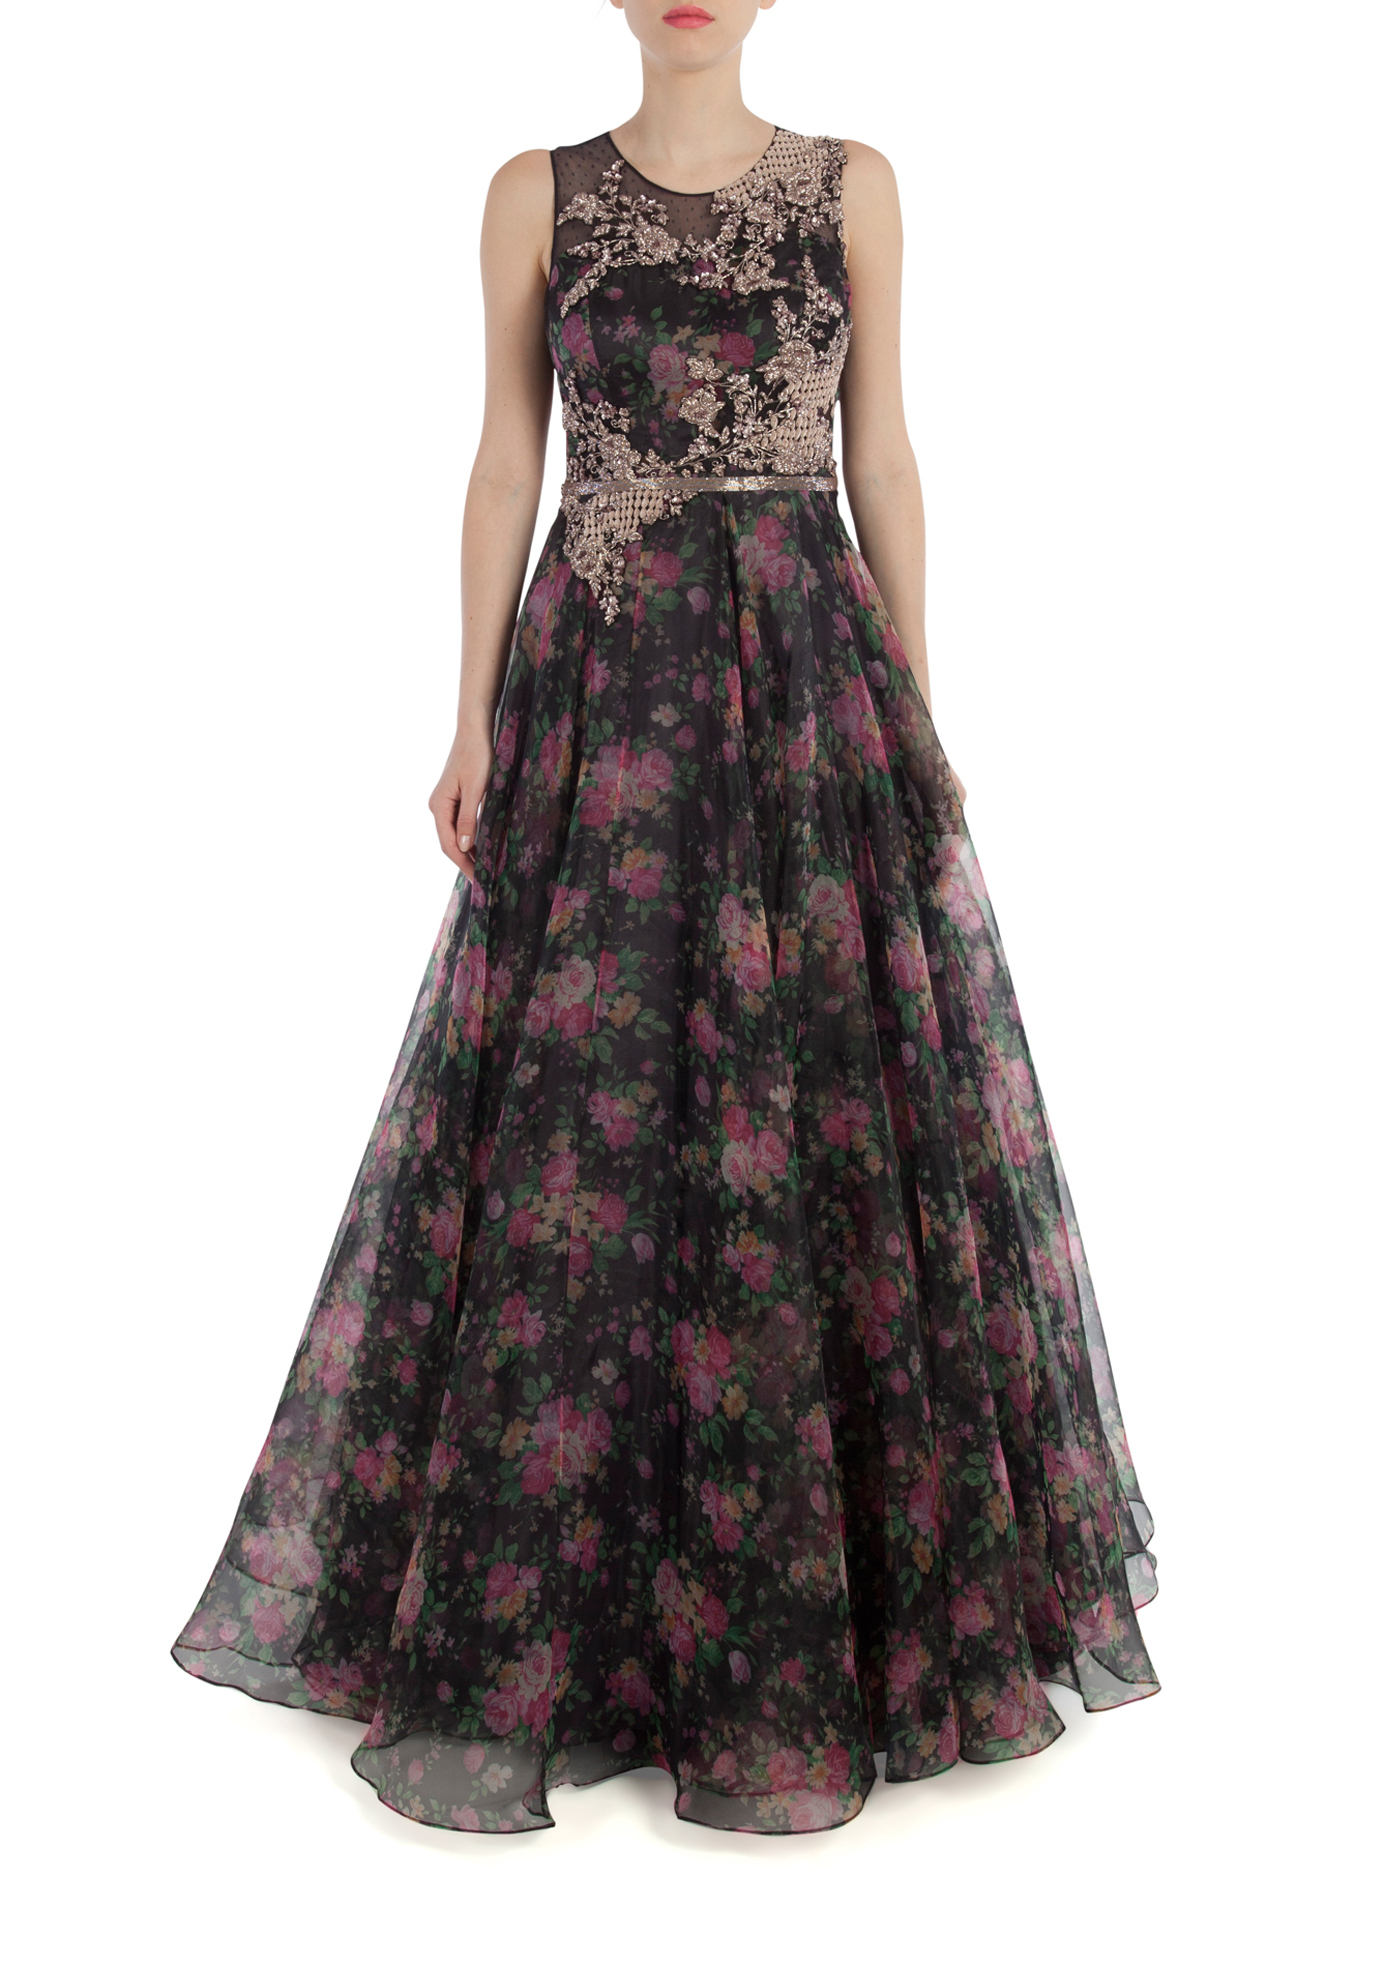 Floral demure crystal gown by Dolly J | The Secret Label